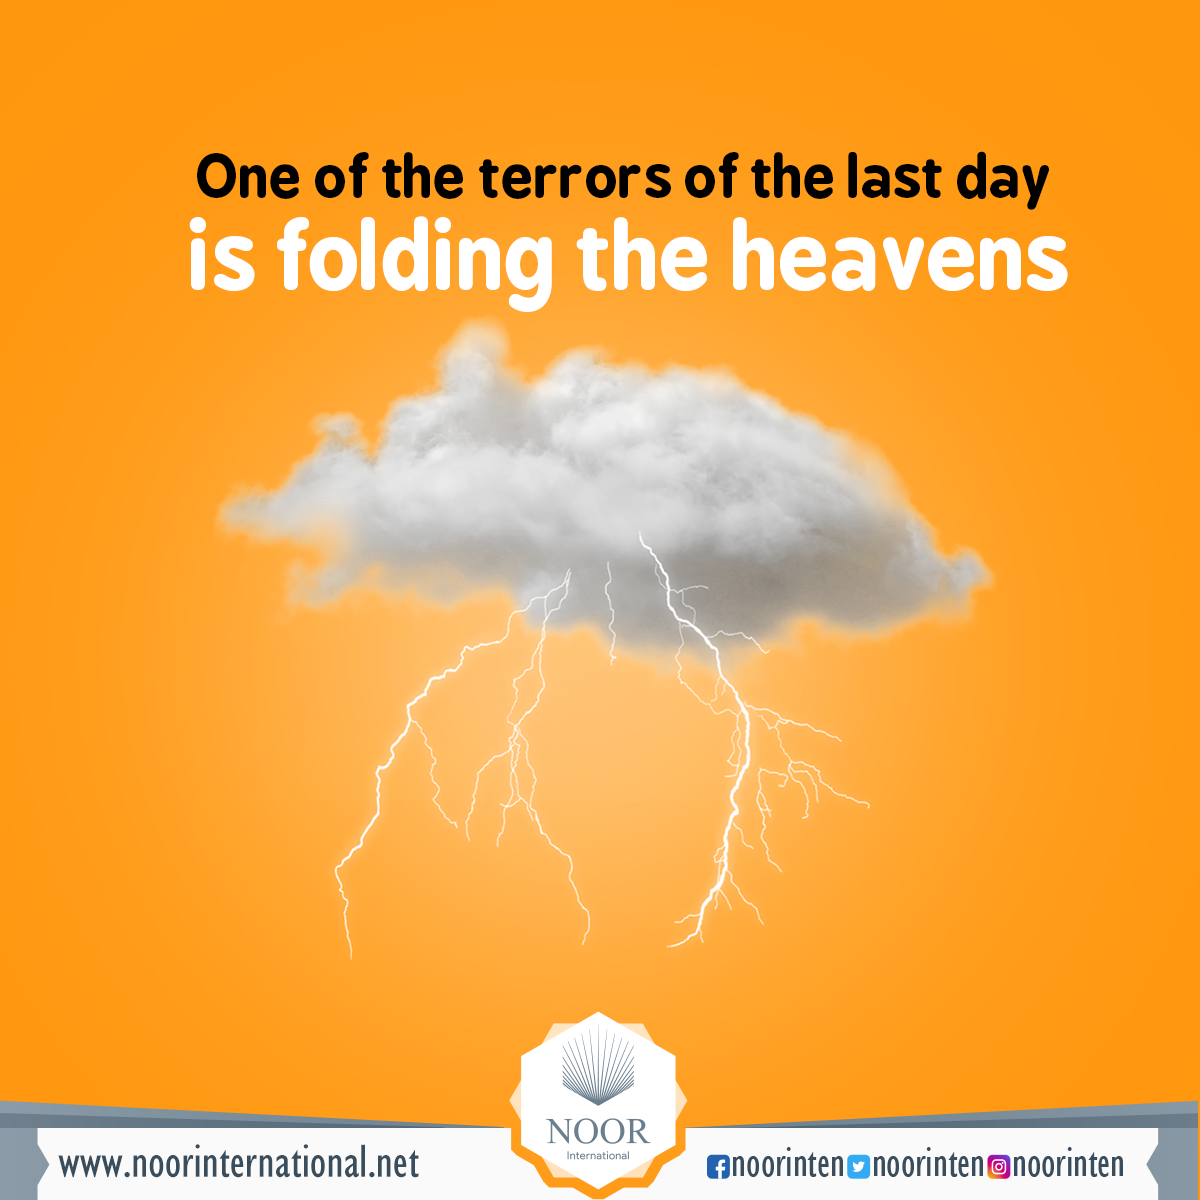 One of the terrors of the last day is folding the heavens